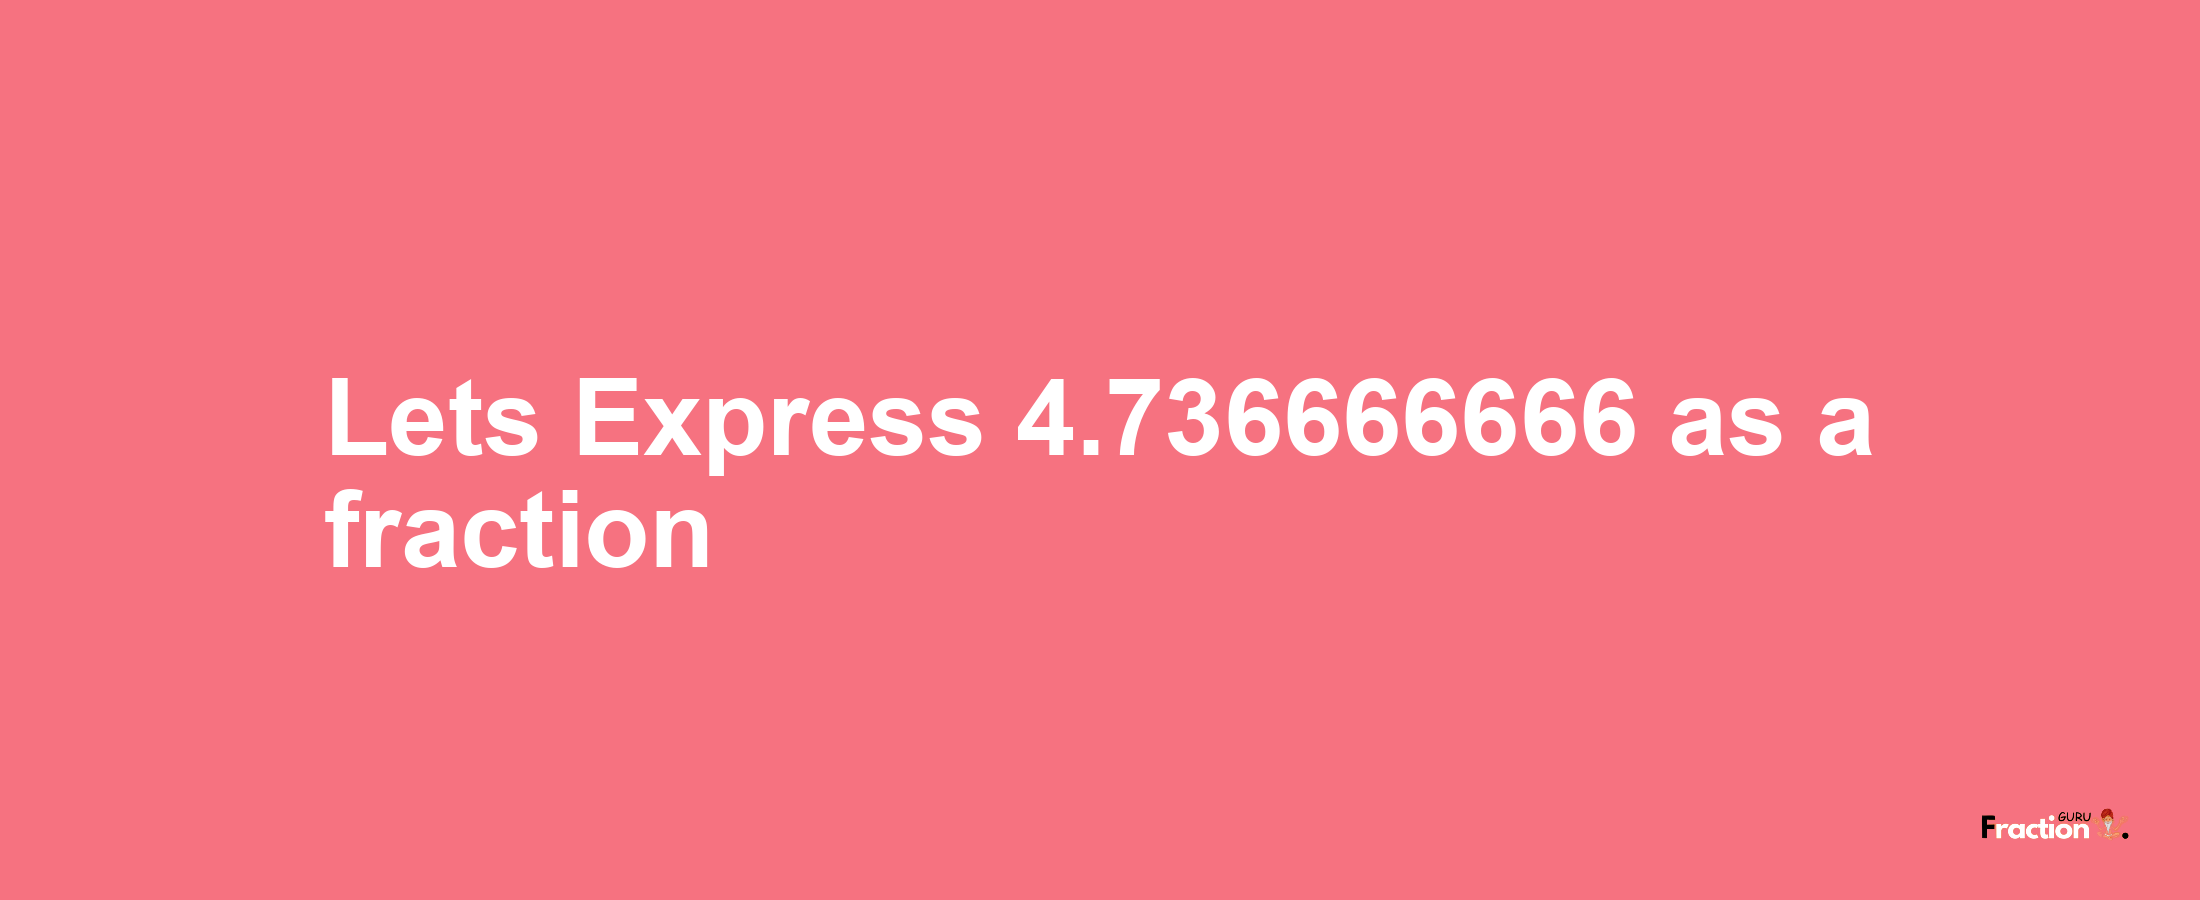 Lets Express 4.736666666 as afraction